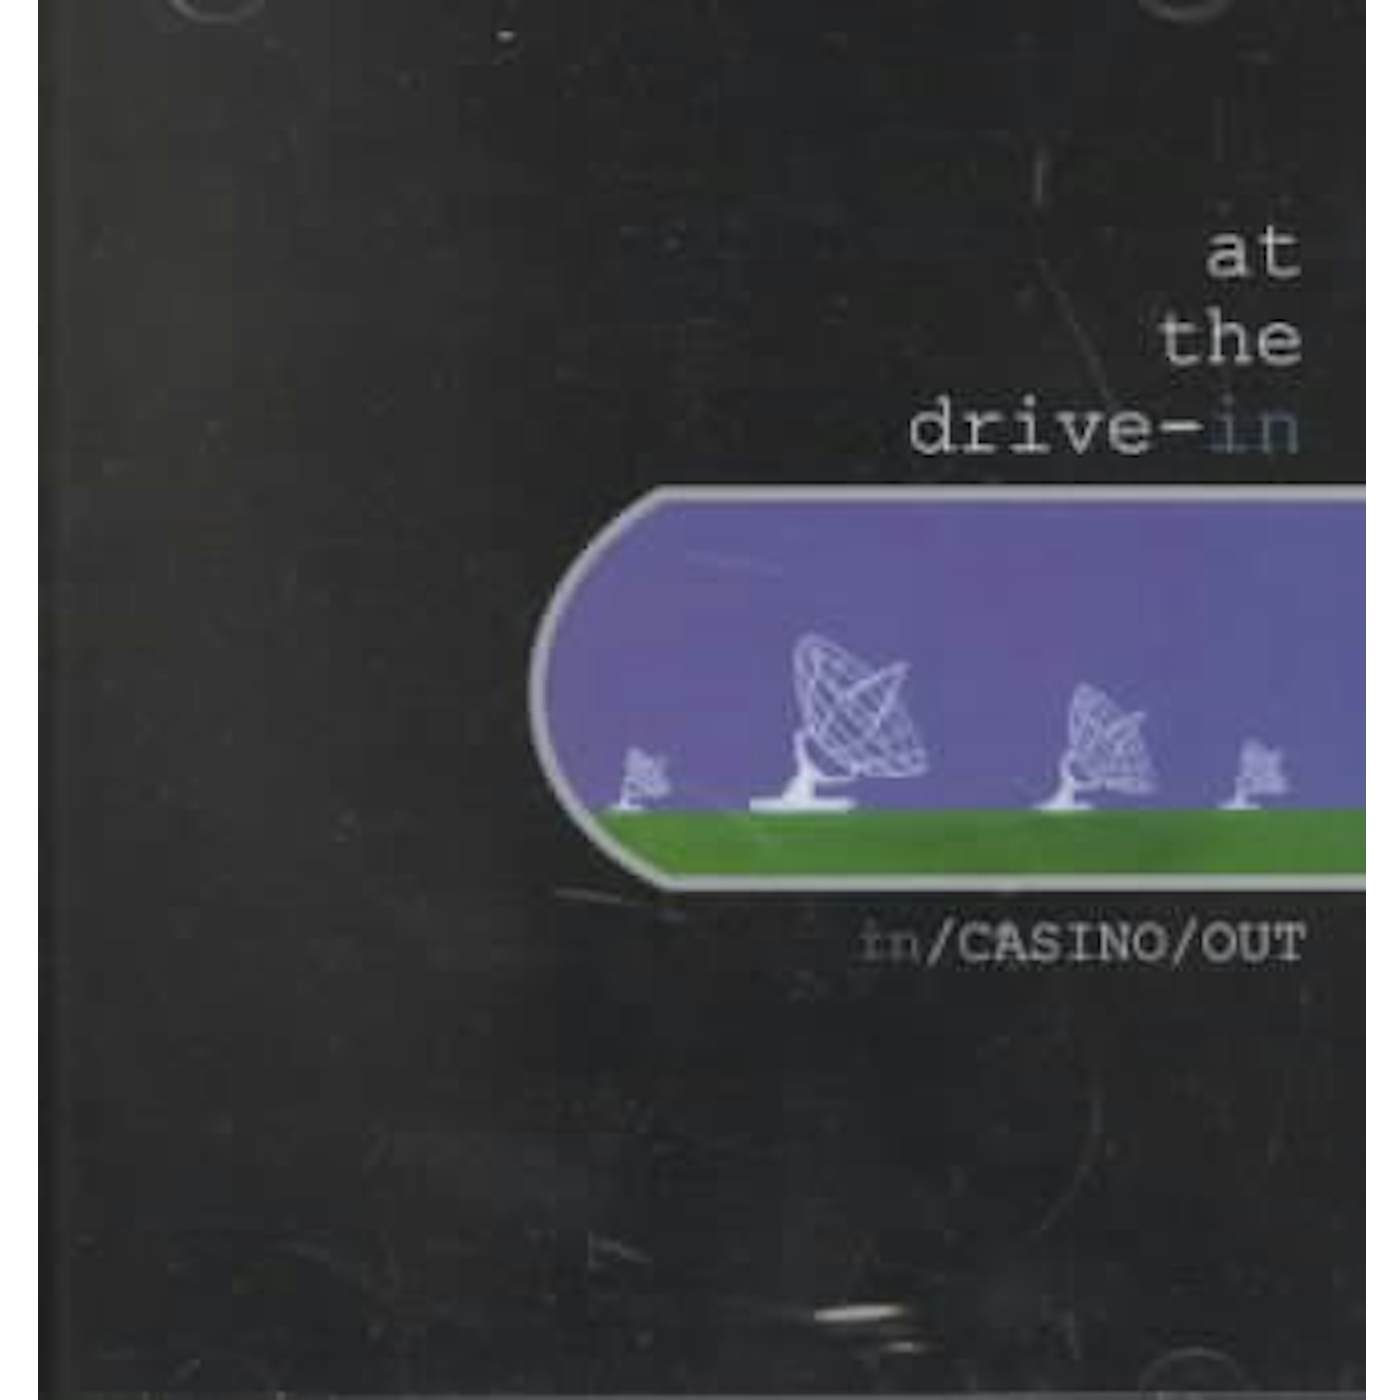 At the Drive-In IN / CASINO / OUT CD